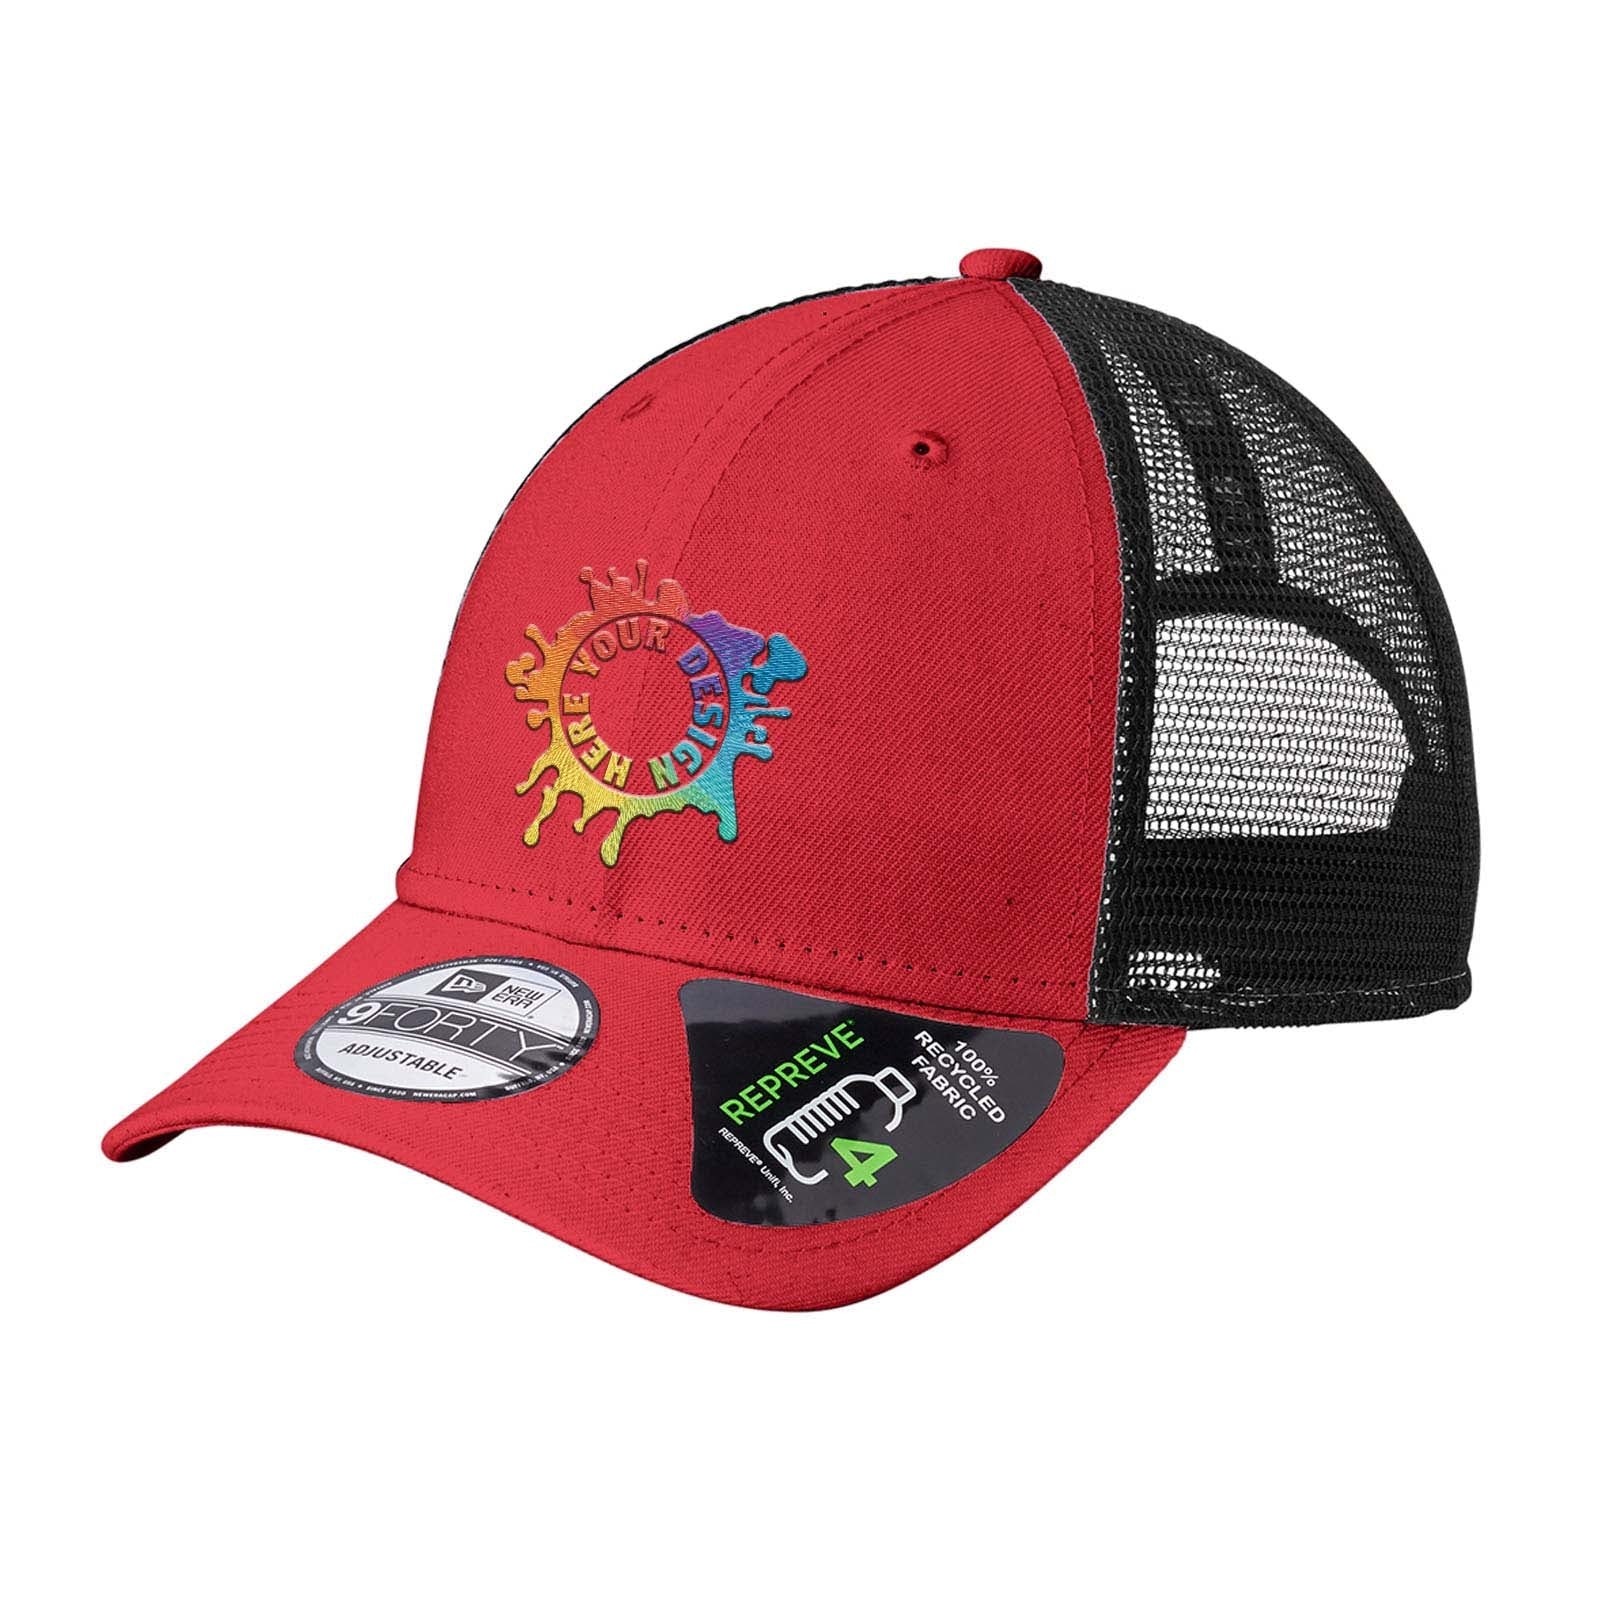 Cap Recycled New Era® Embroidered Snapback